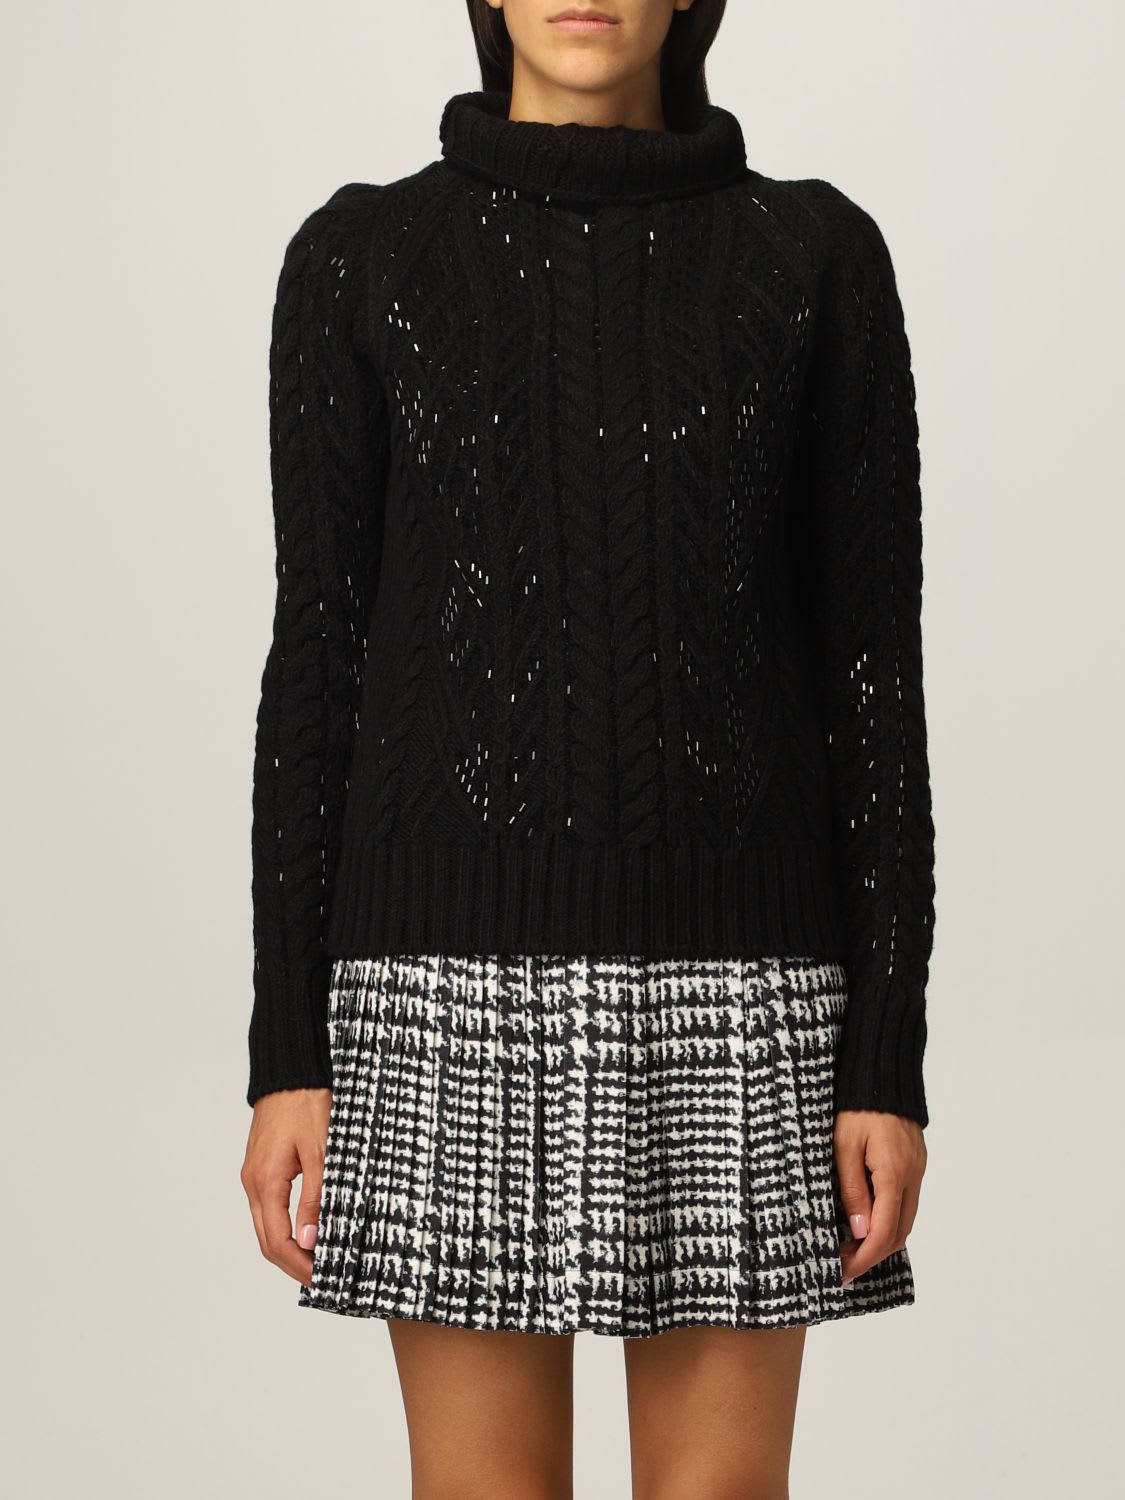 ERMANNO SCERVINO SWEATER ERMANNO SCERVINO SWEATER IN VIRGIN WOOL WITH APPLICATIONS,D395M301CTHSK 95708